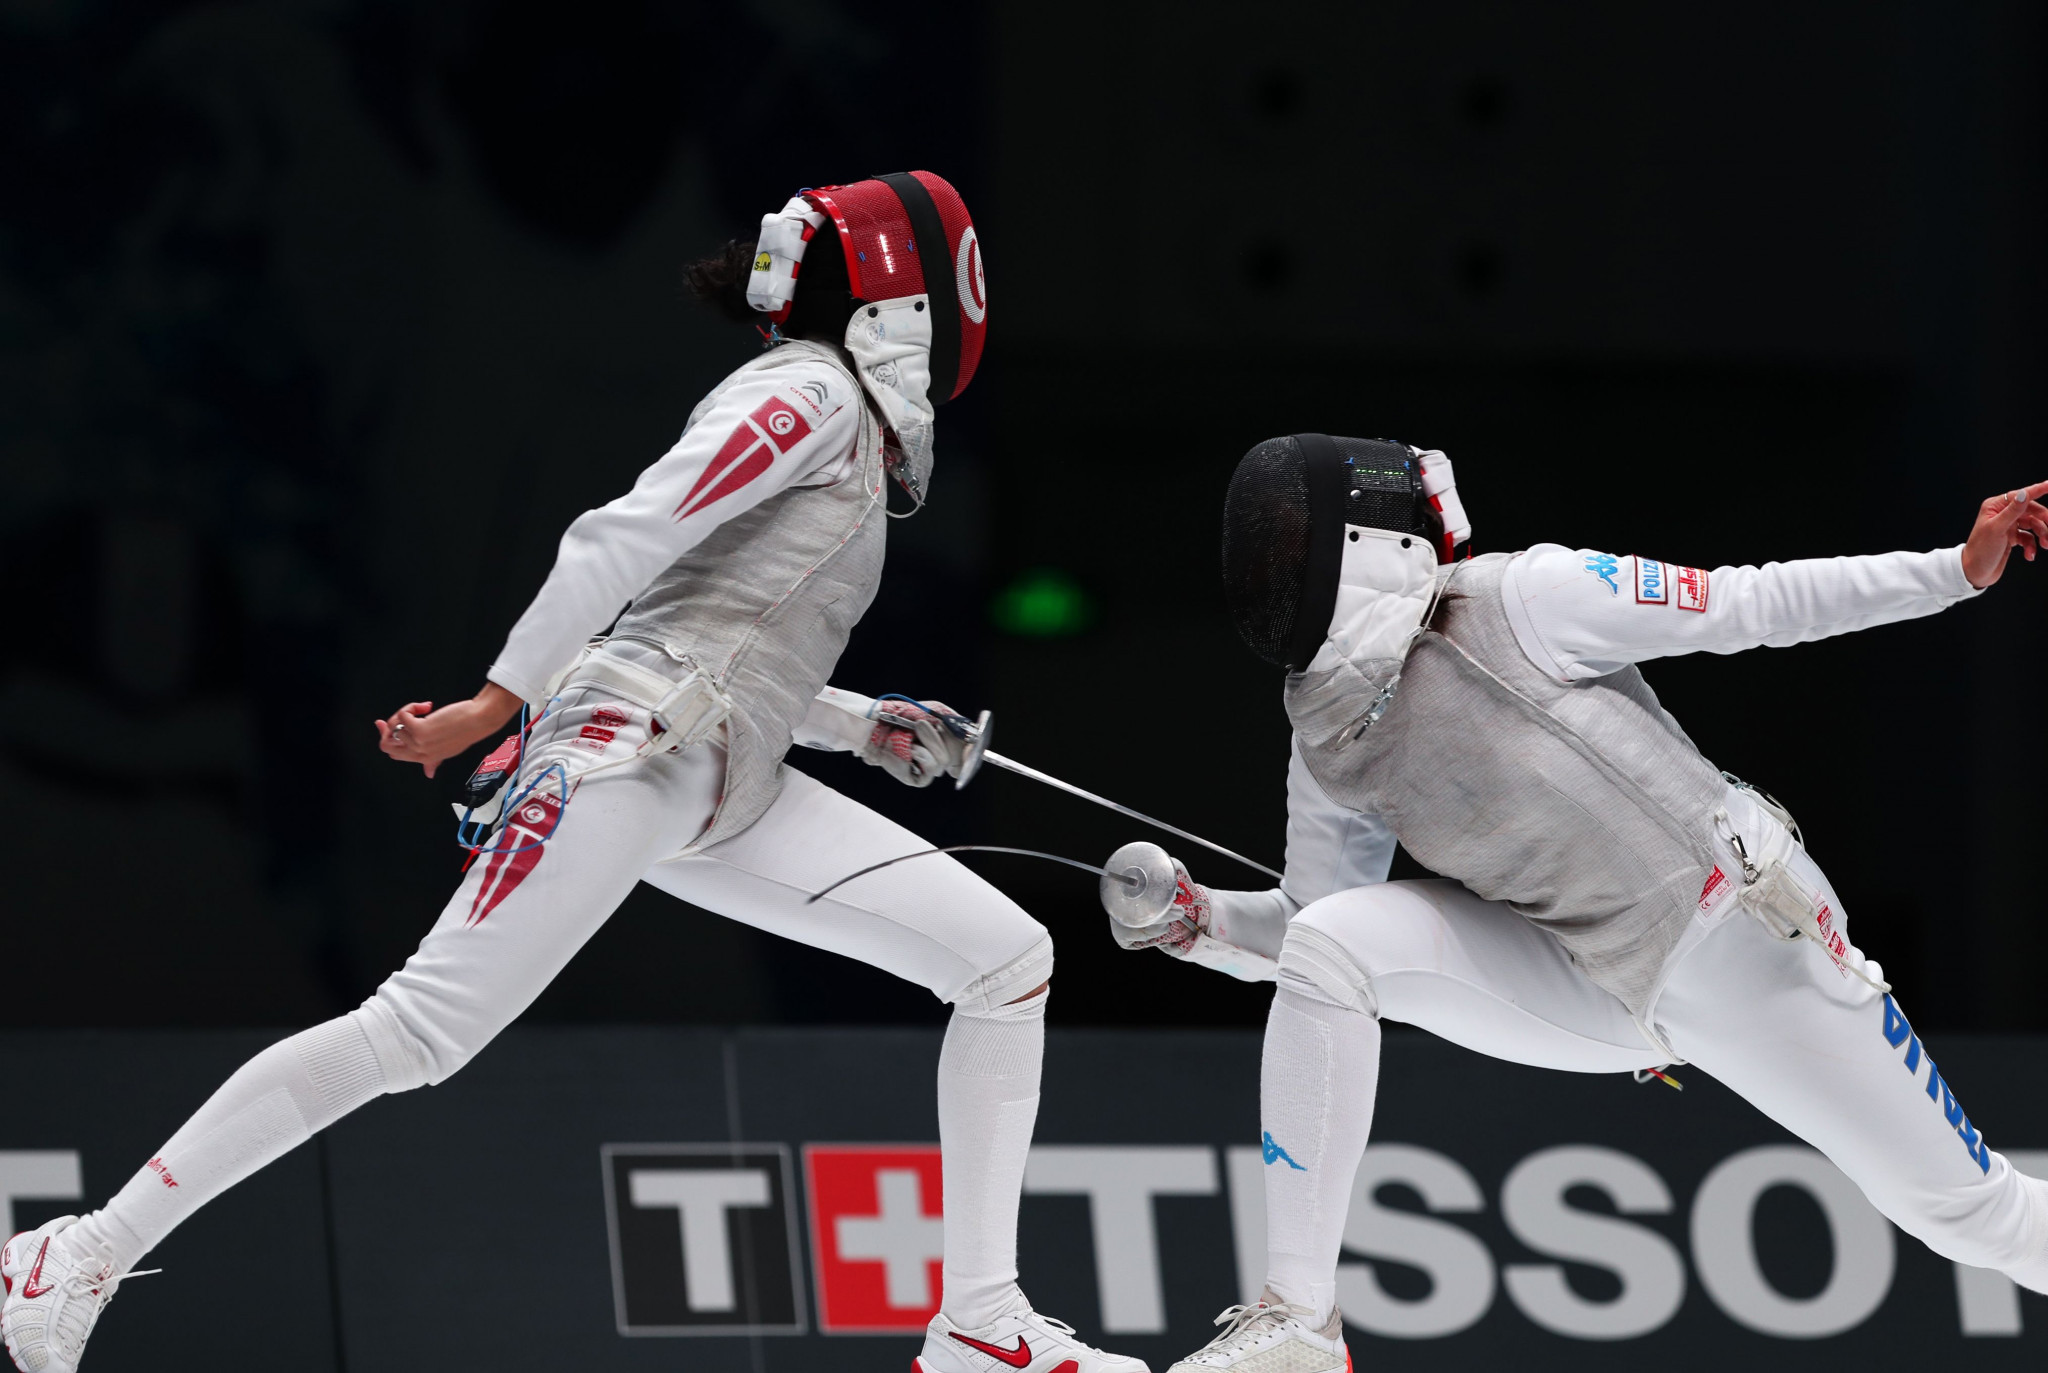 Olympic bronze medallist Boubakri among field for African Fencing Championships in Bamako